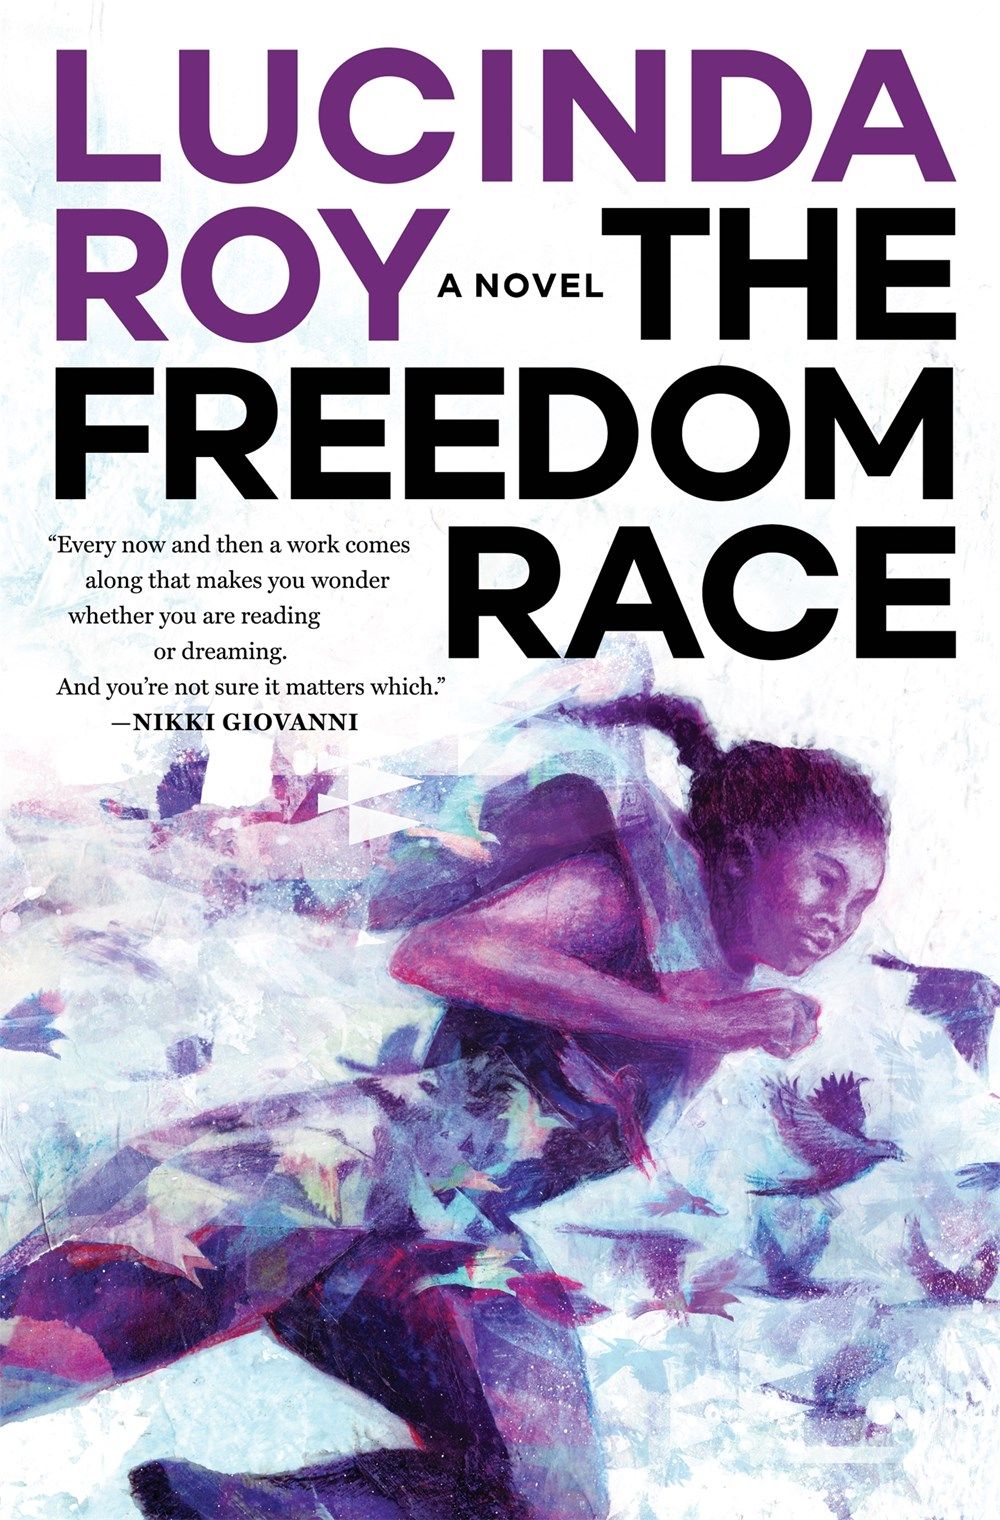 Cover of The Freedom Race by Lucinda Roy